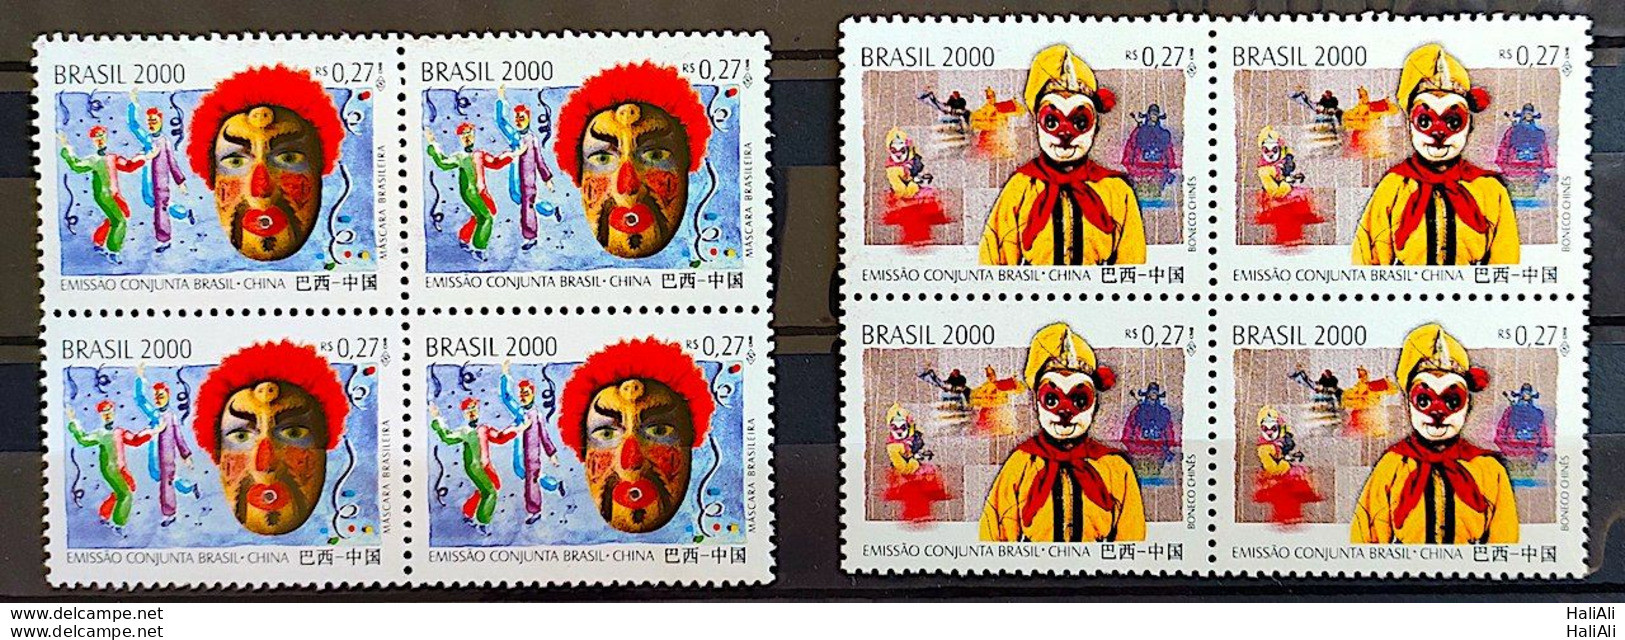 C 2343 Brazil Stamp Joint Issue Brazil China Mask 2000 Block Of 4 - Ungebraucht